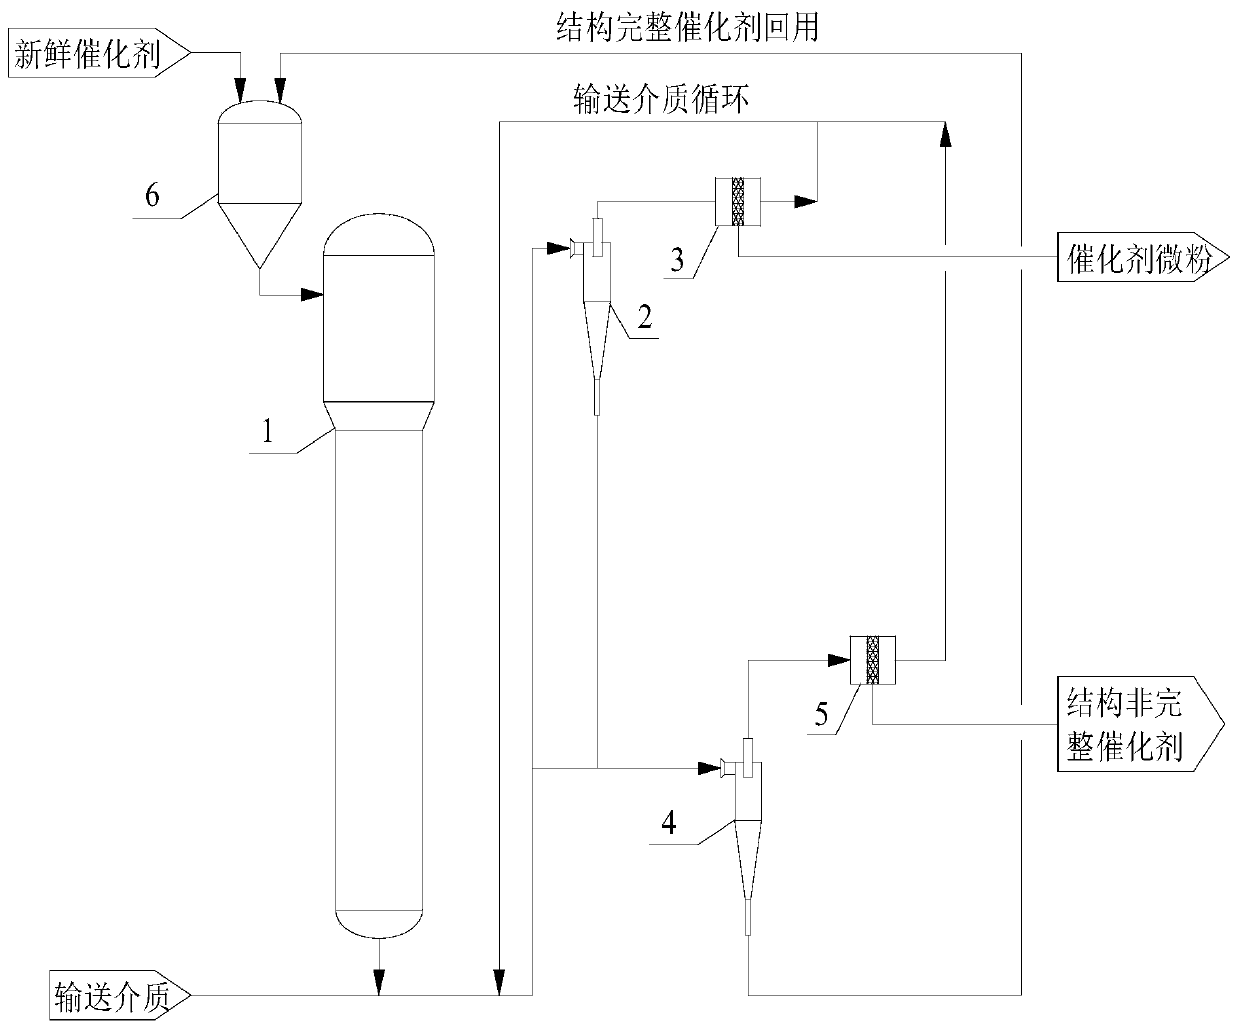 Method and device for removing particles in biomass pyrolysis liquid fluidized bed reactor